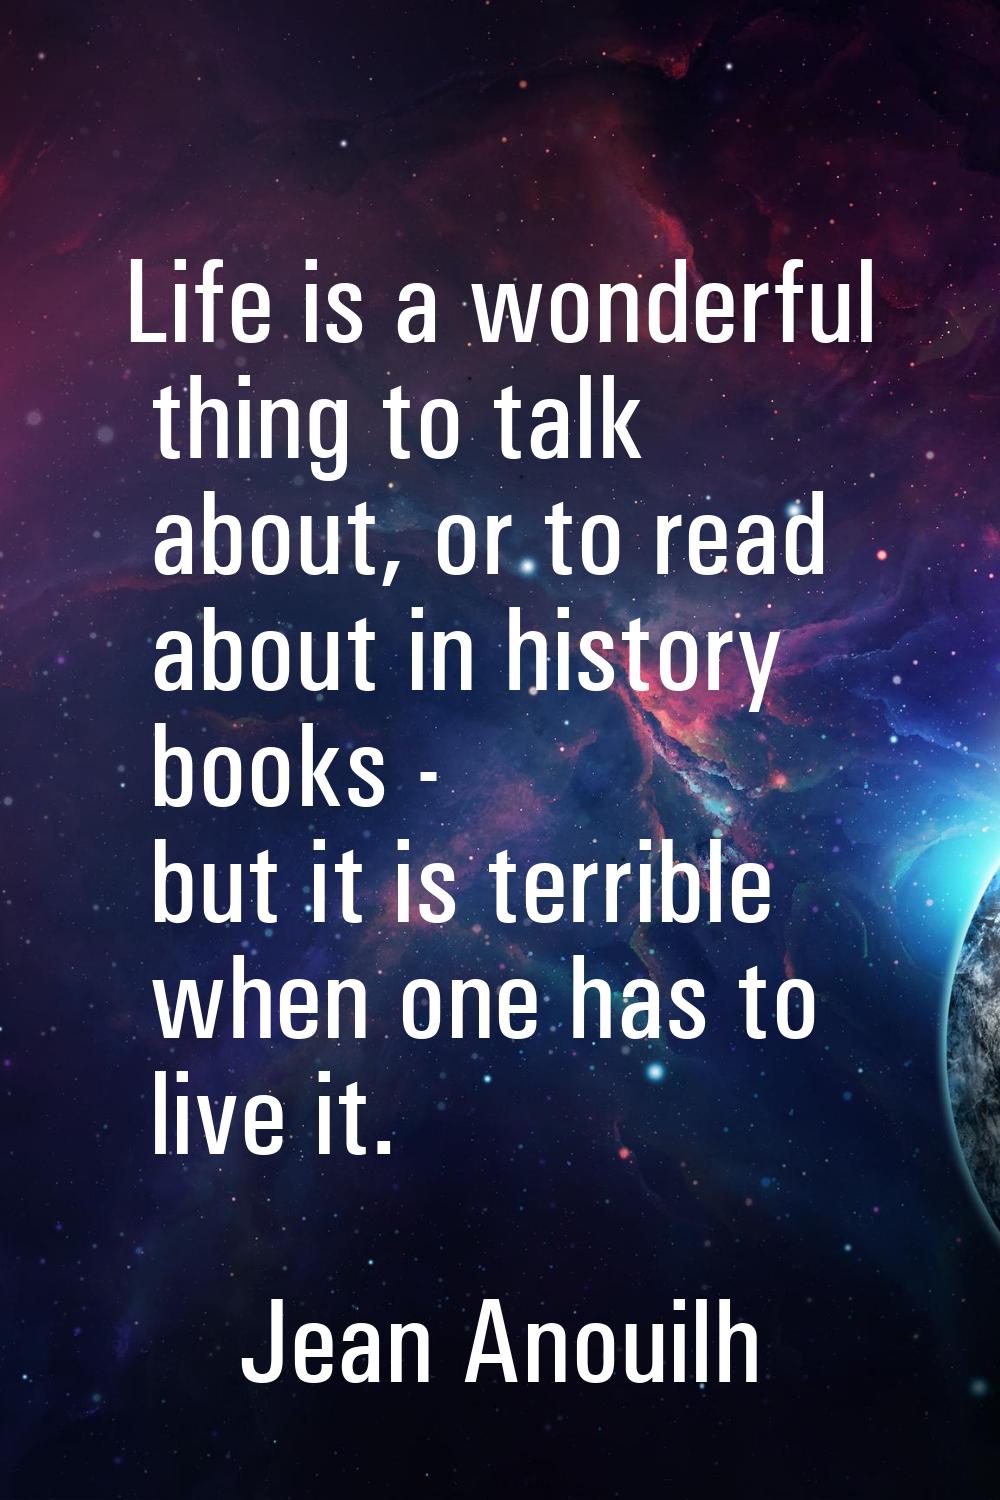 Life is a wonderful thing to talk about, or to read about in history books - but it is terrible whe